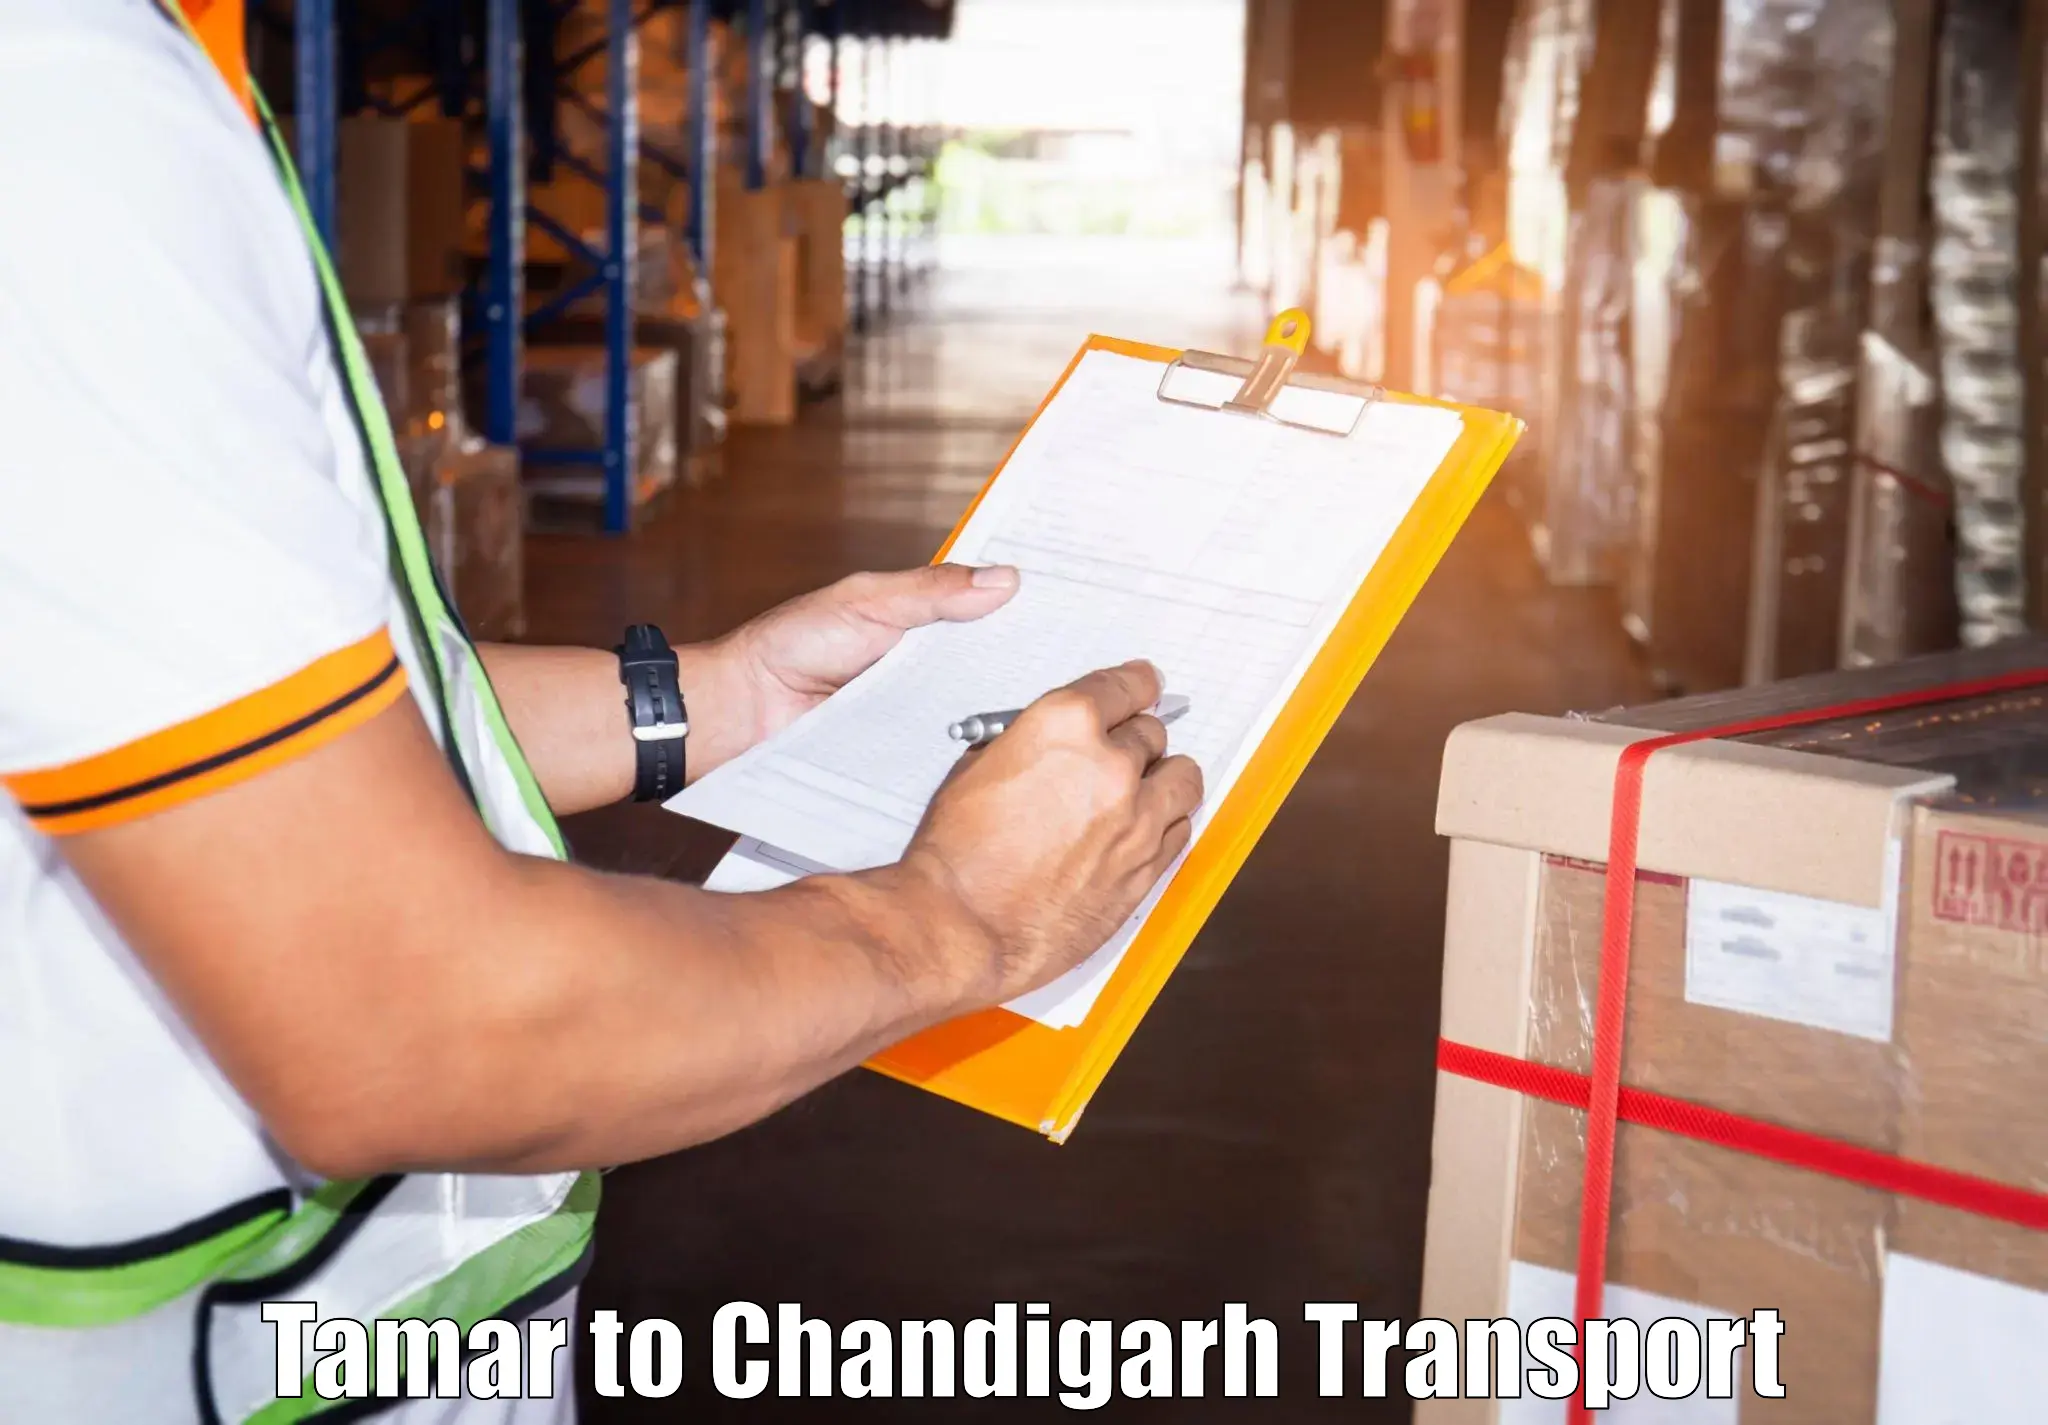 Container transport service Tamar to Chandigarh